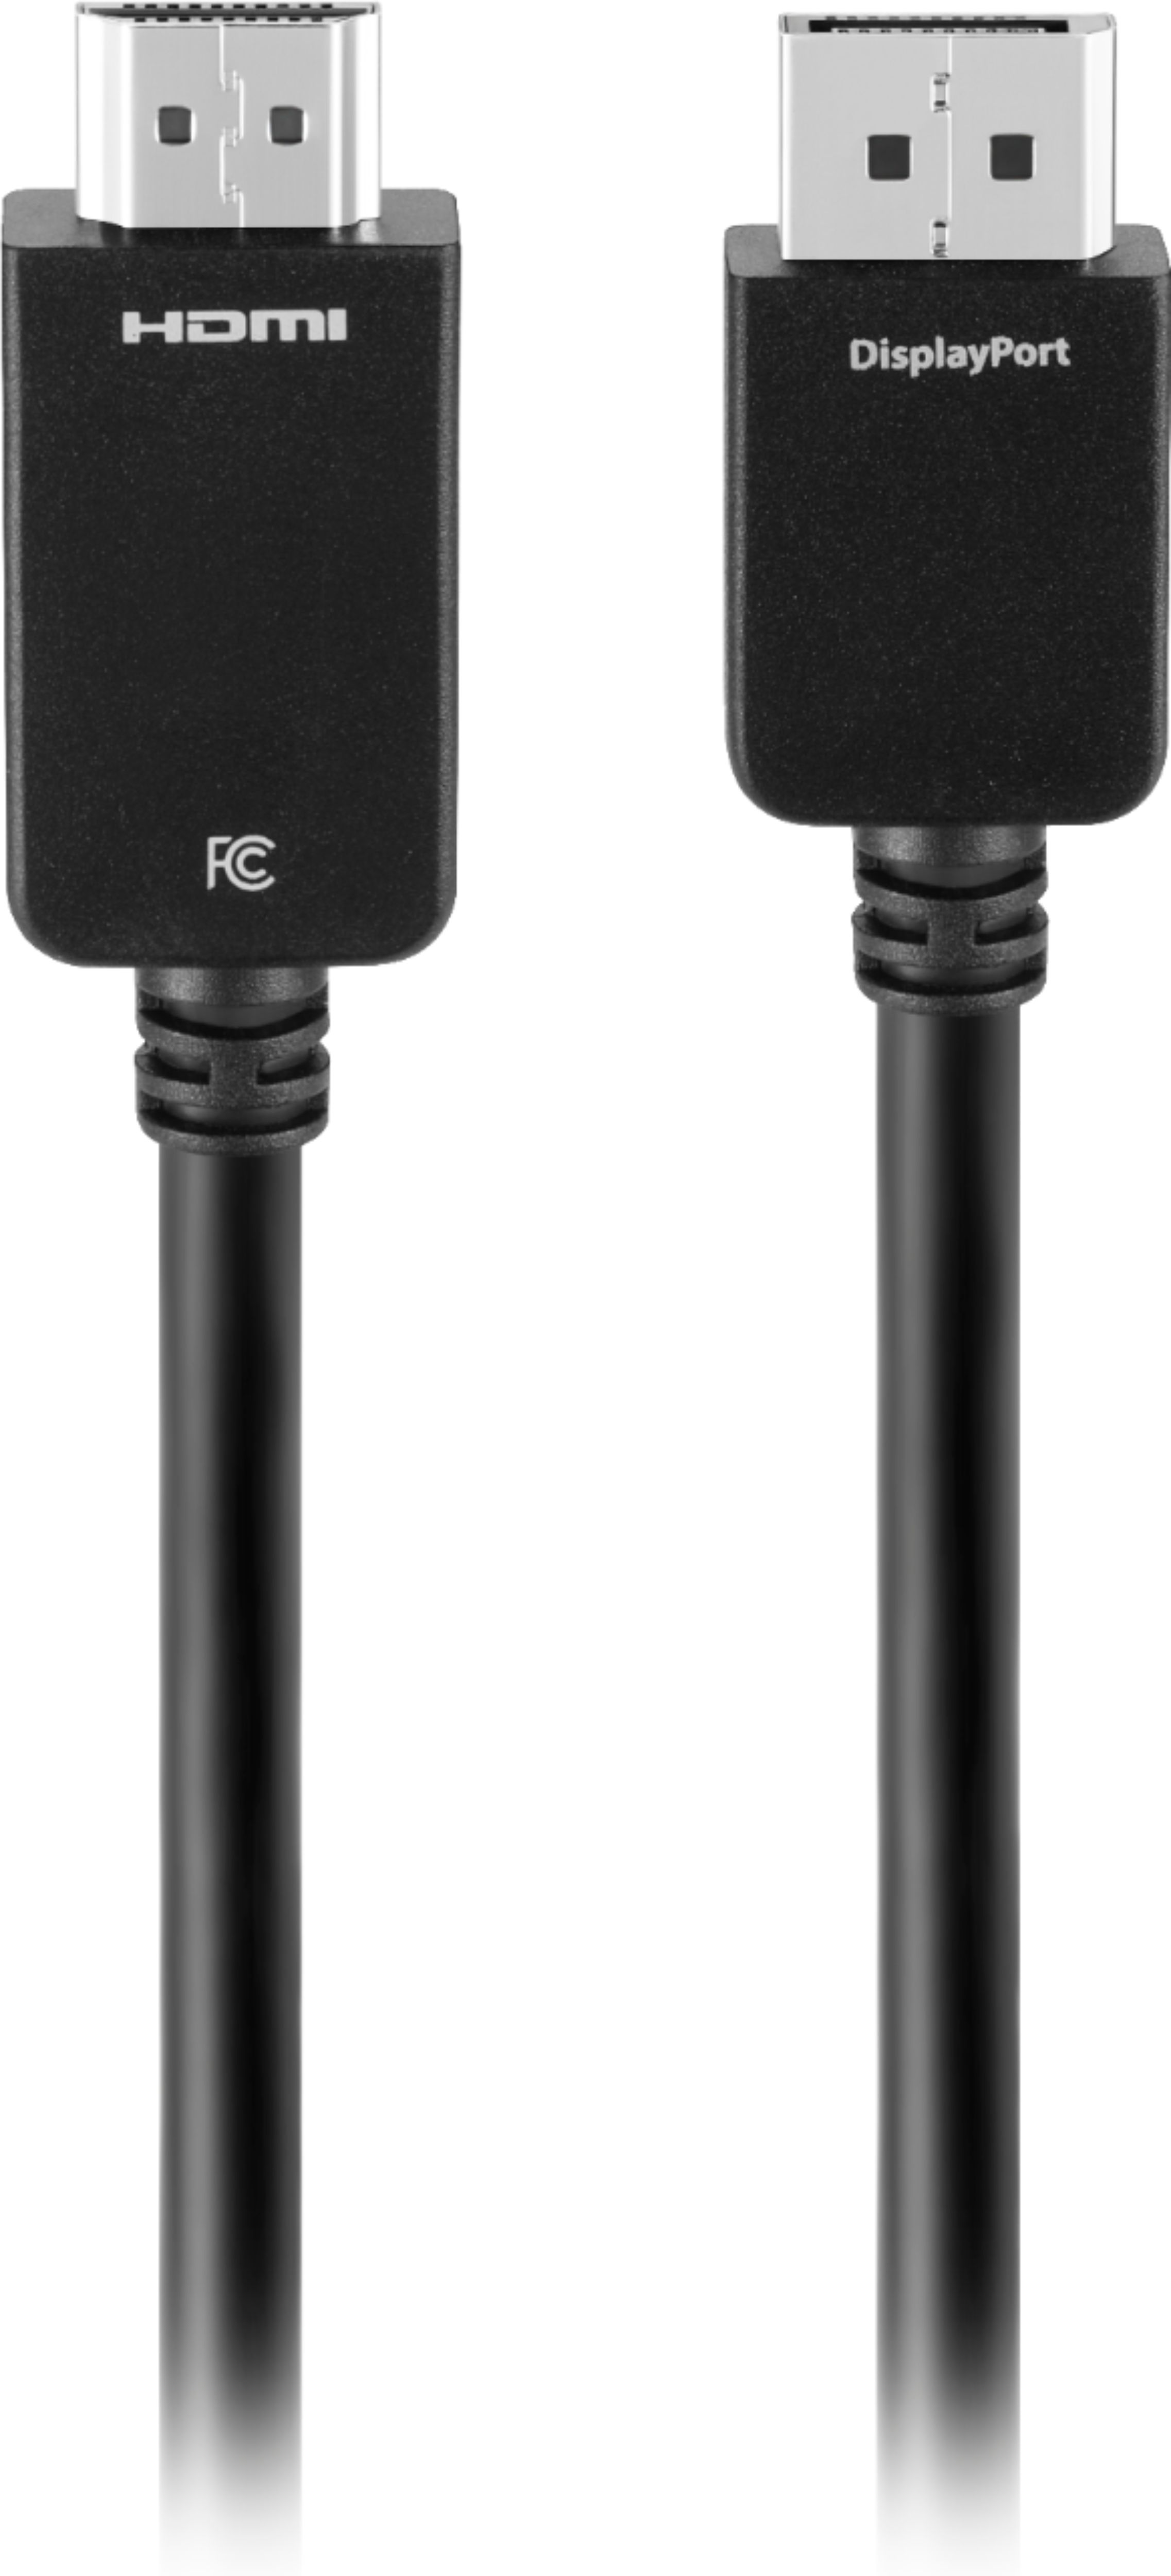 Angle View: Best Buy essentials™ - 6' DisplayPort to HDMI Cable - Black